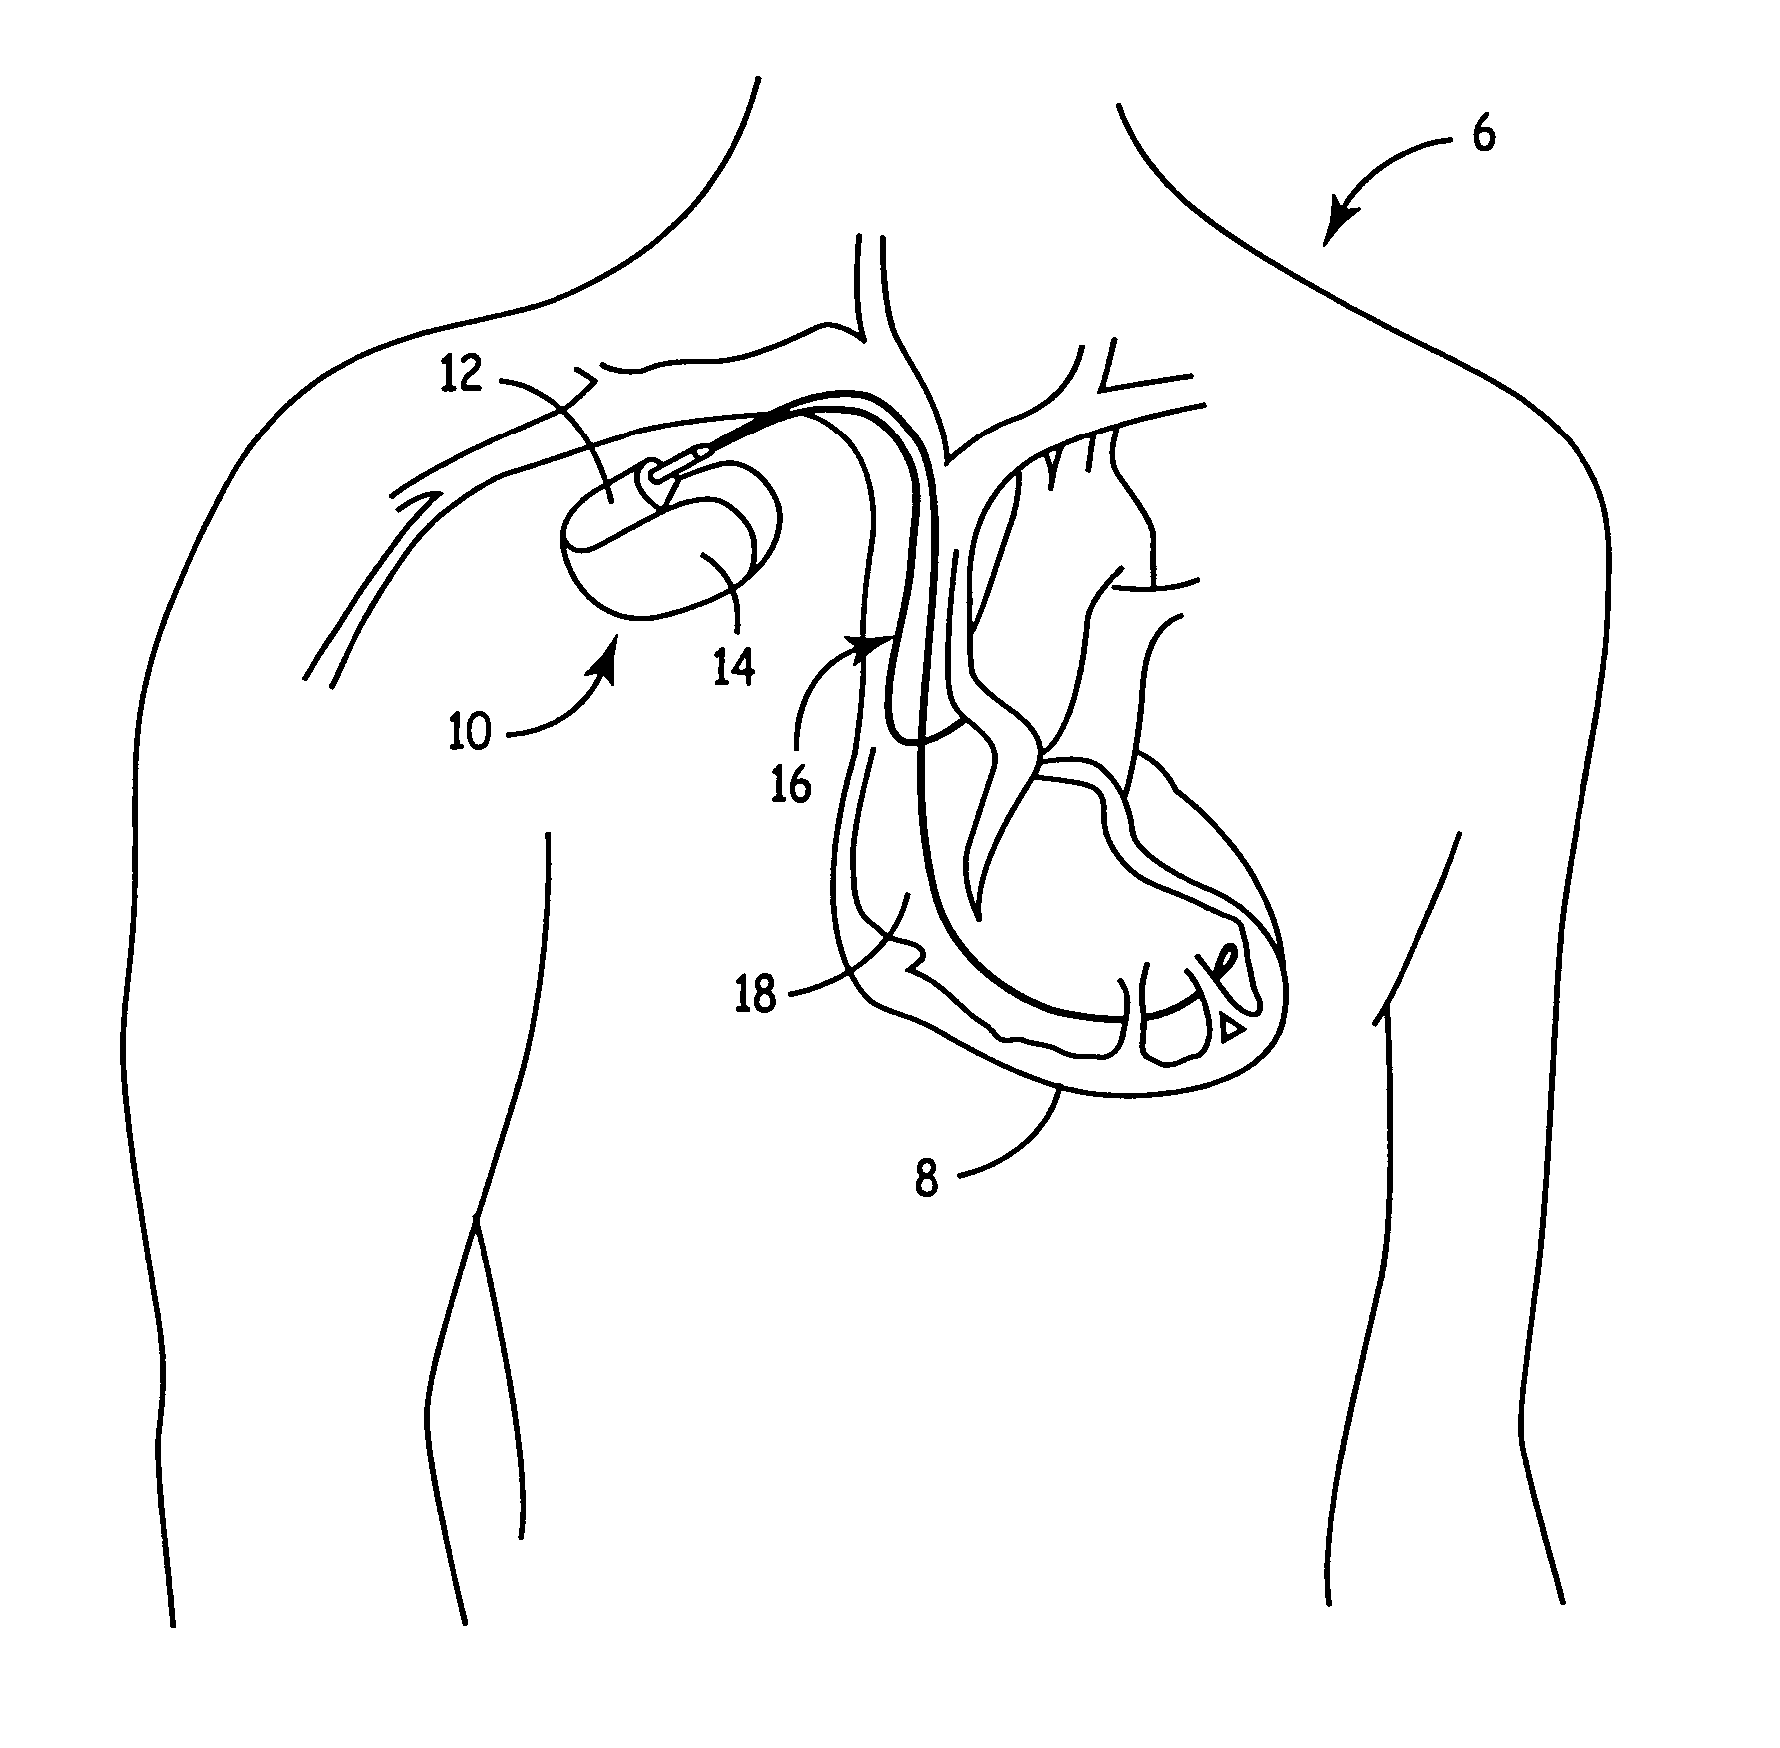 System and method for determining an effectiveness of a ventricular pacing protocol for an implantable medical device